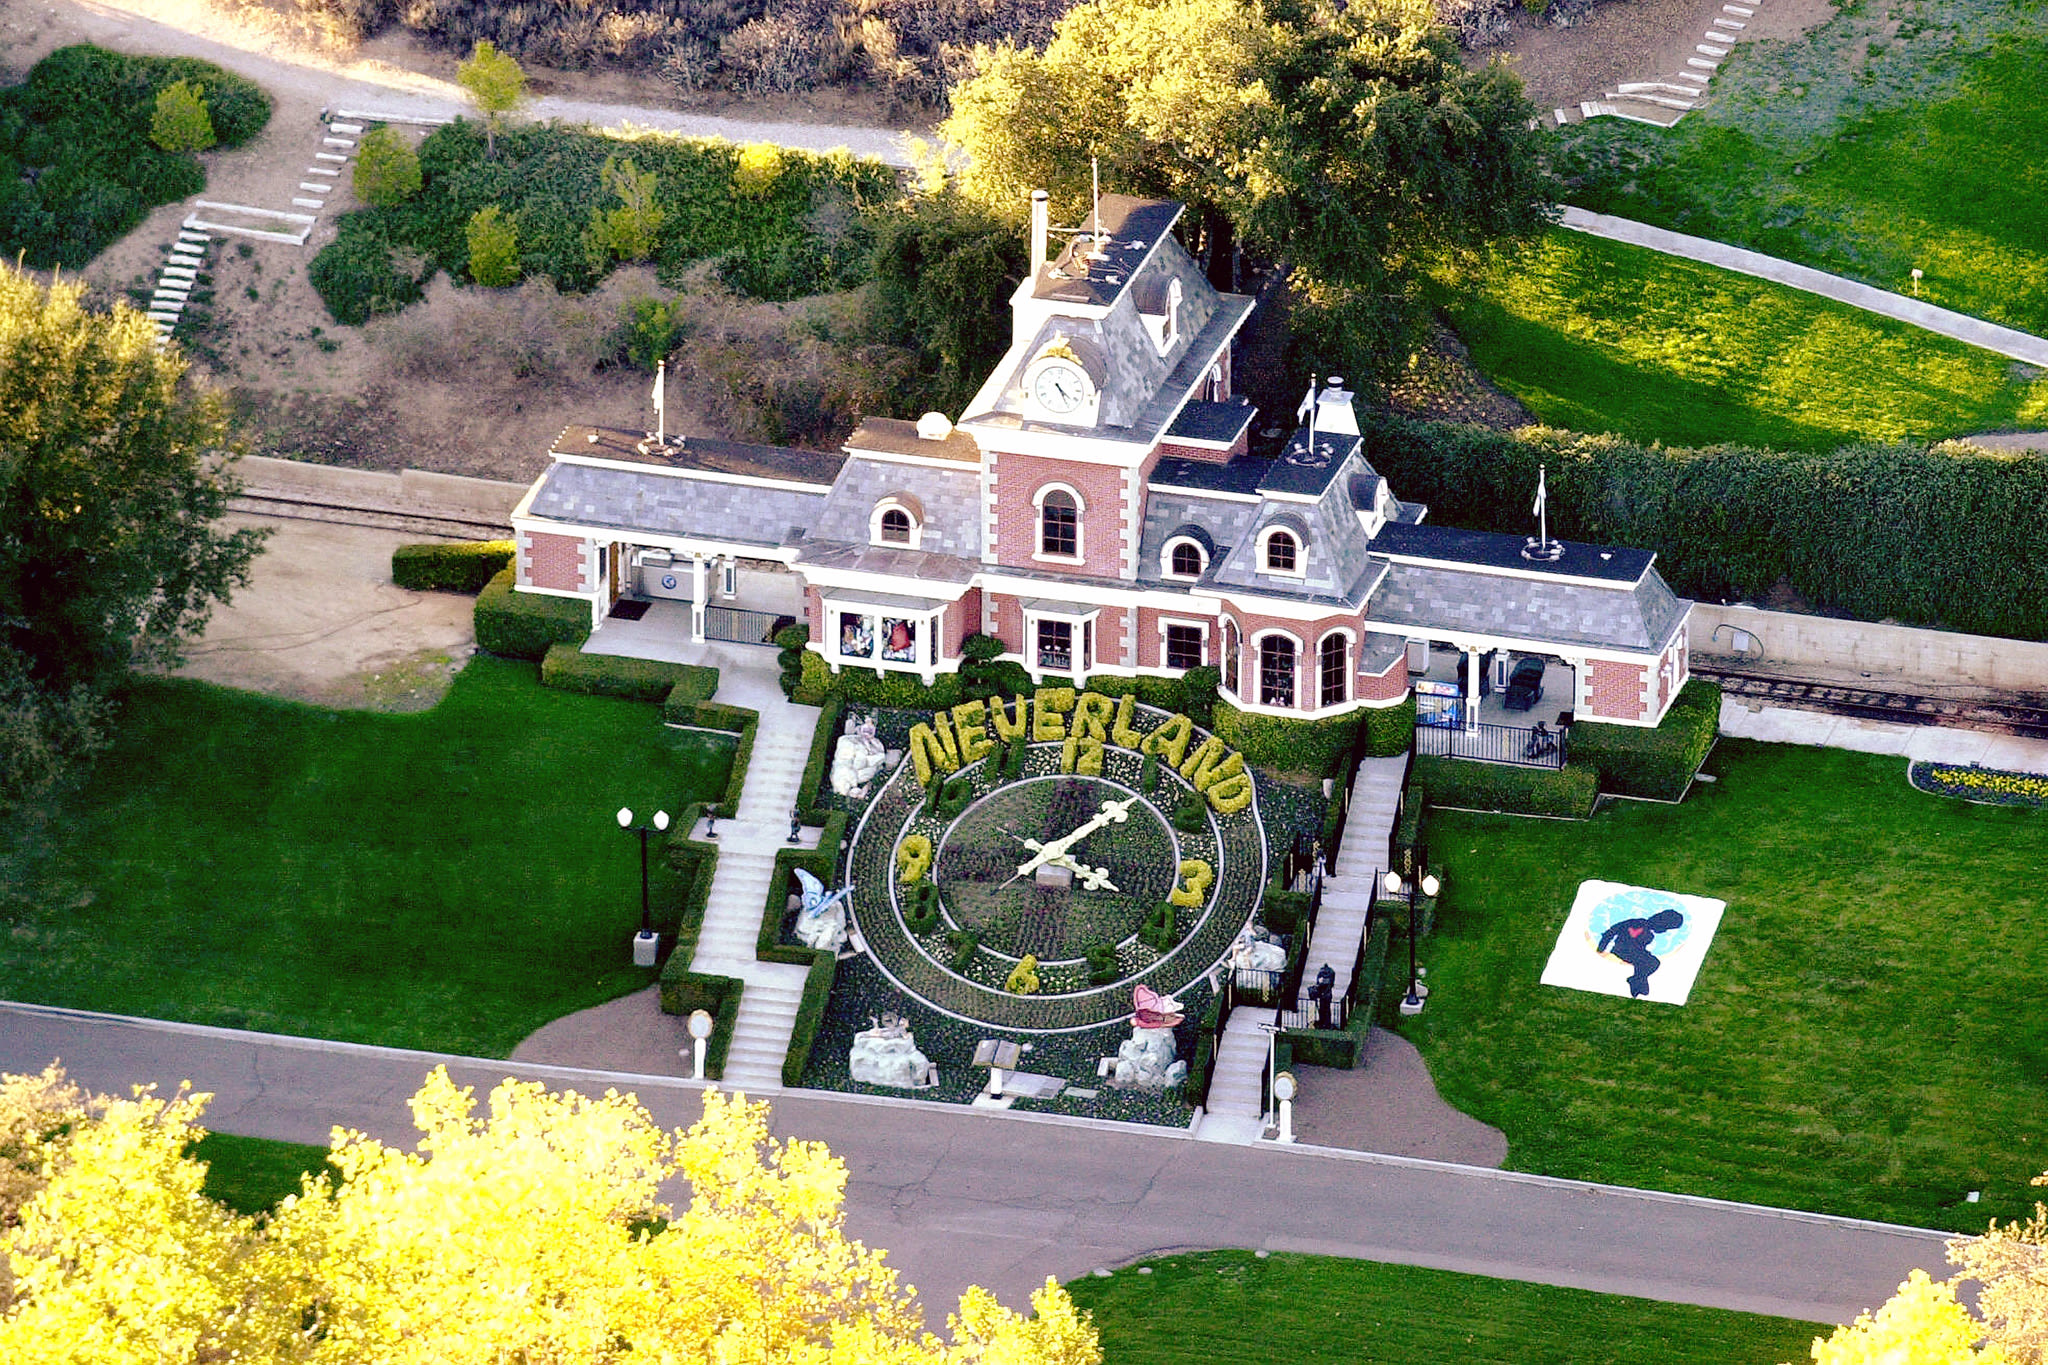 Details emerge on Michael Jackson biopic filming at Neverland Ranch